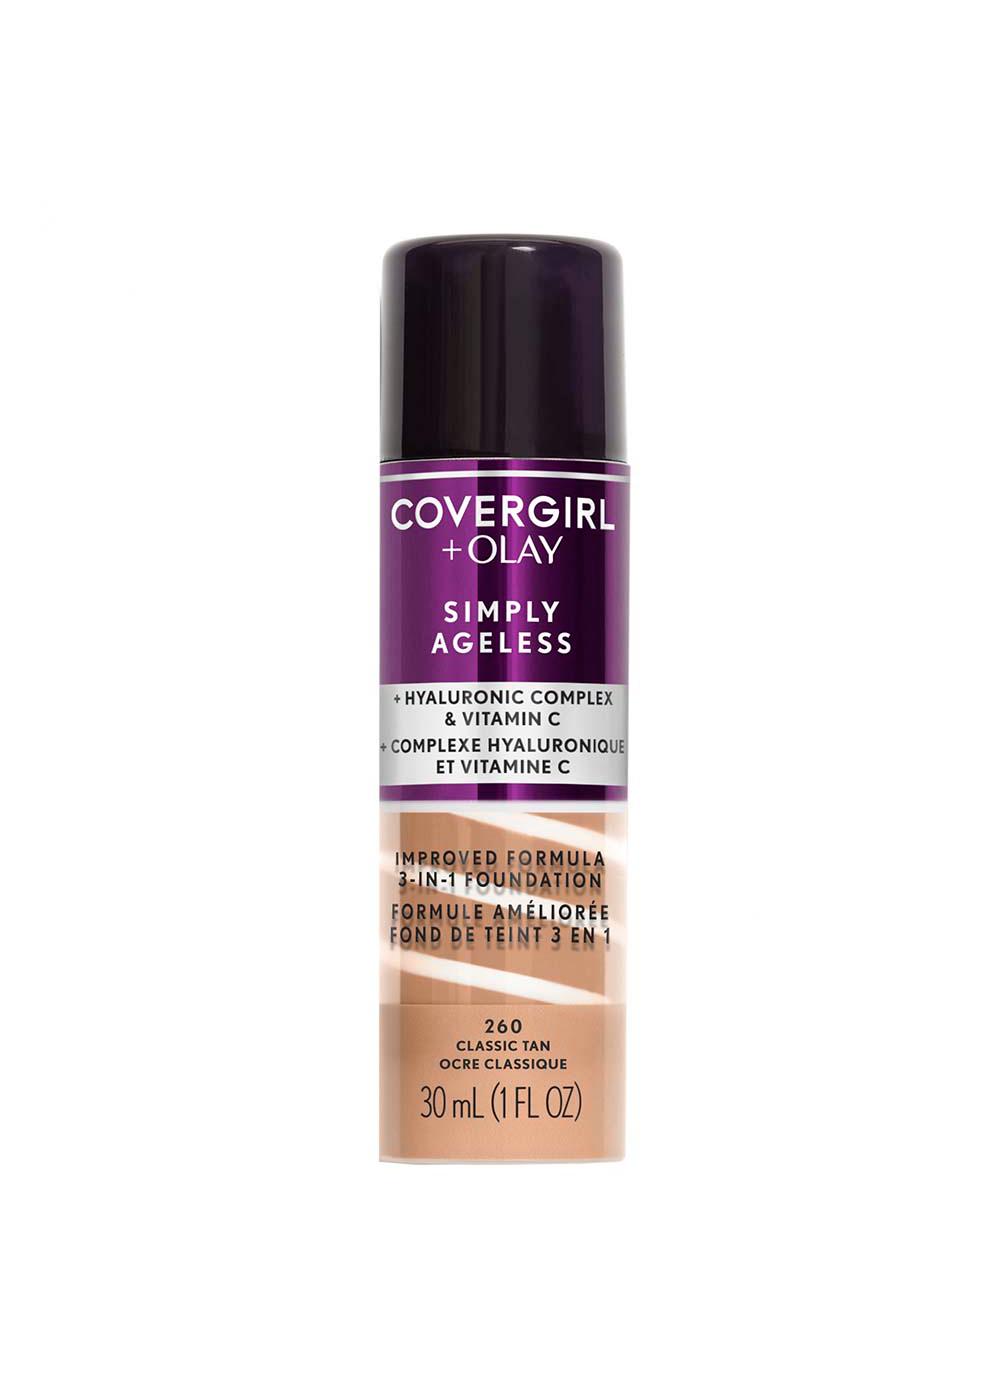 Covergirl Simply Ageless 3-in-1 Liquid Foundation 260 Classic Tan; image 1 of 6